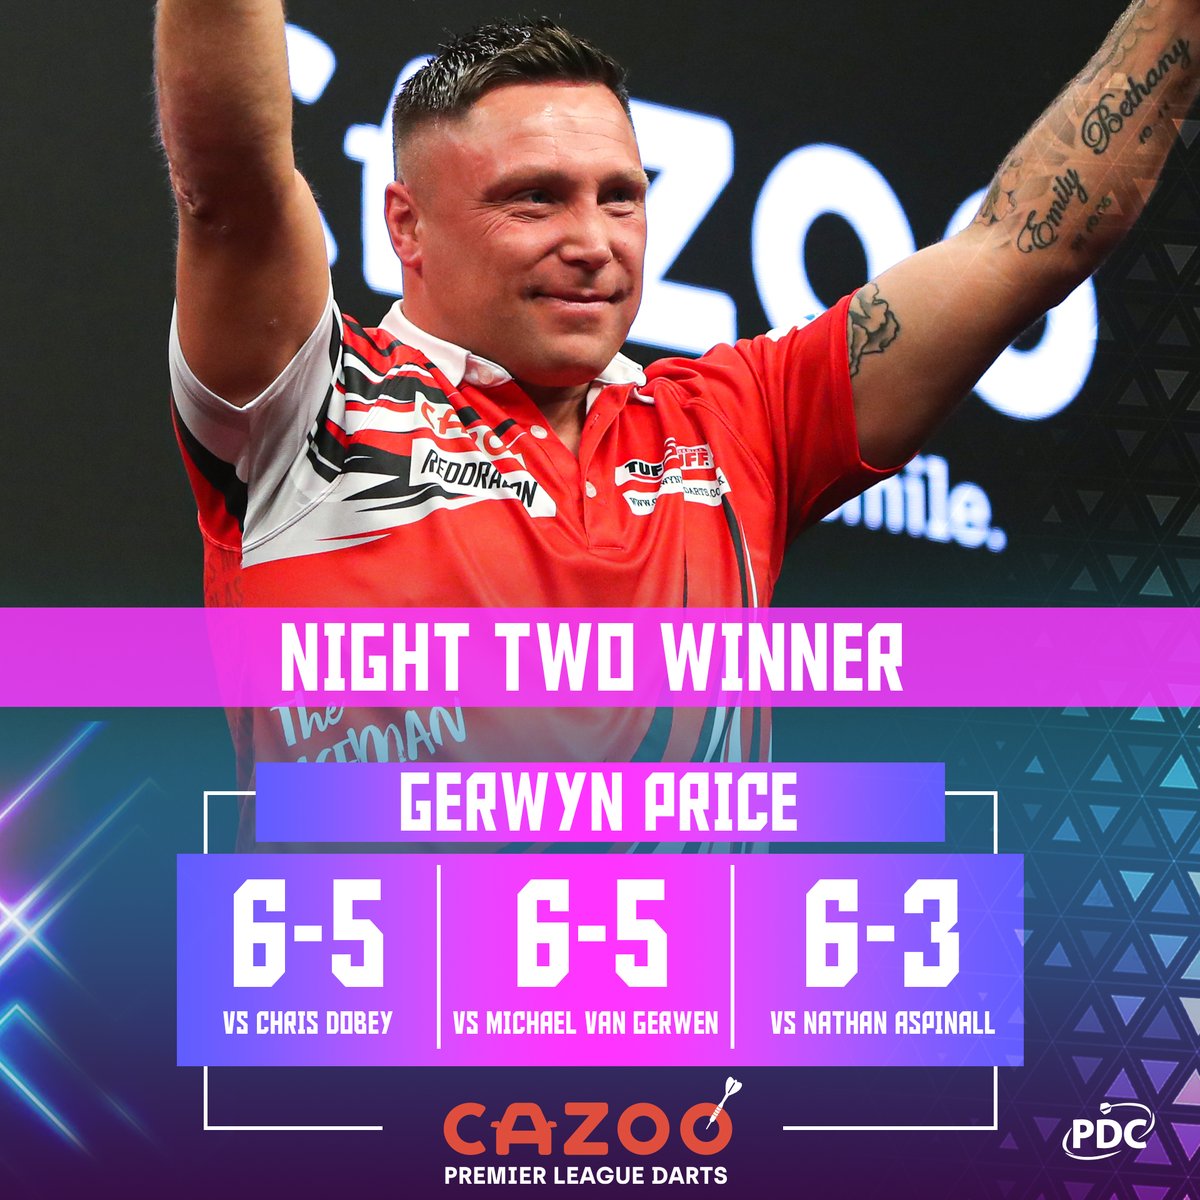 IT'S PRICE'S NIGHT IN CARDIFF!🏴󠁧󠁢󠁷󠁬󠁳󠁿 Gerwyn Price raises the roof in the Welsh capital as he reigns supreme on Night Two! 📺 bit.ly/PL23Live | #PLDarts